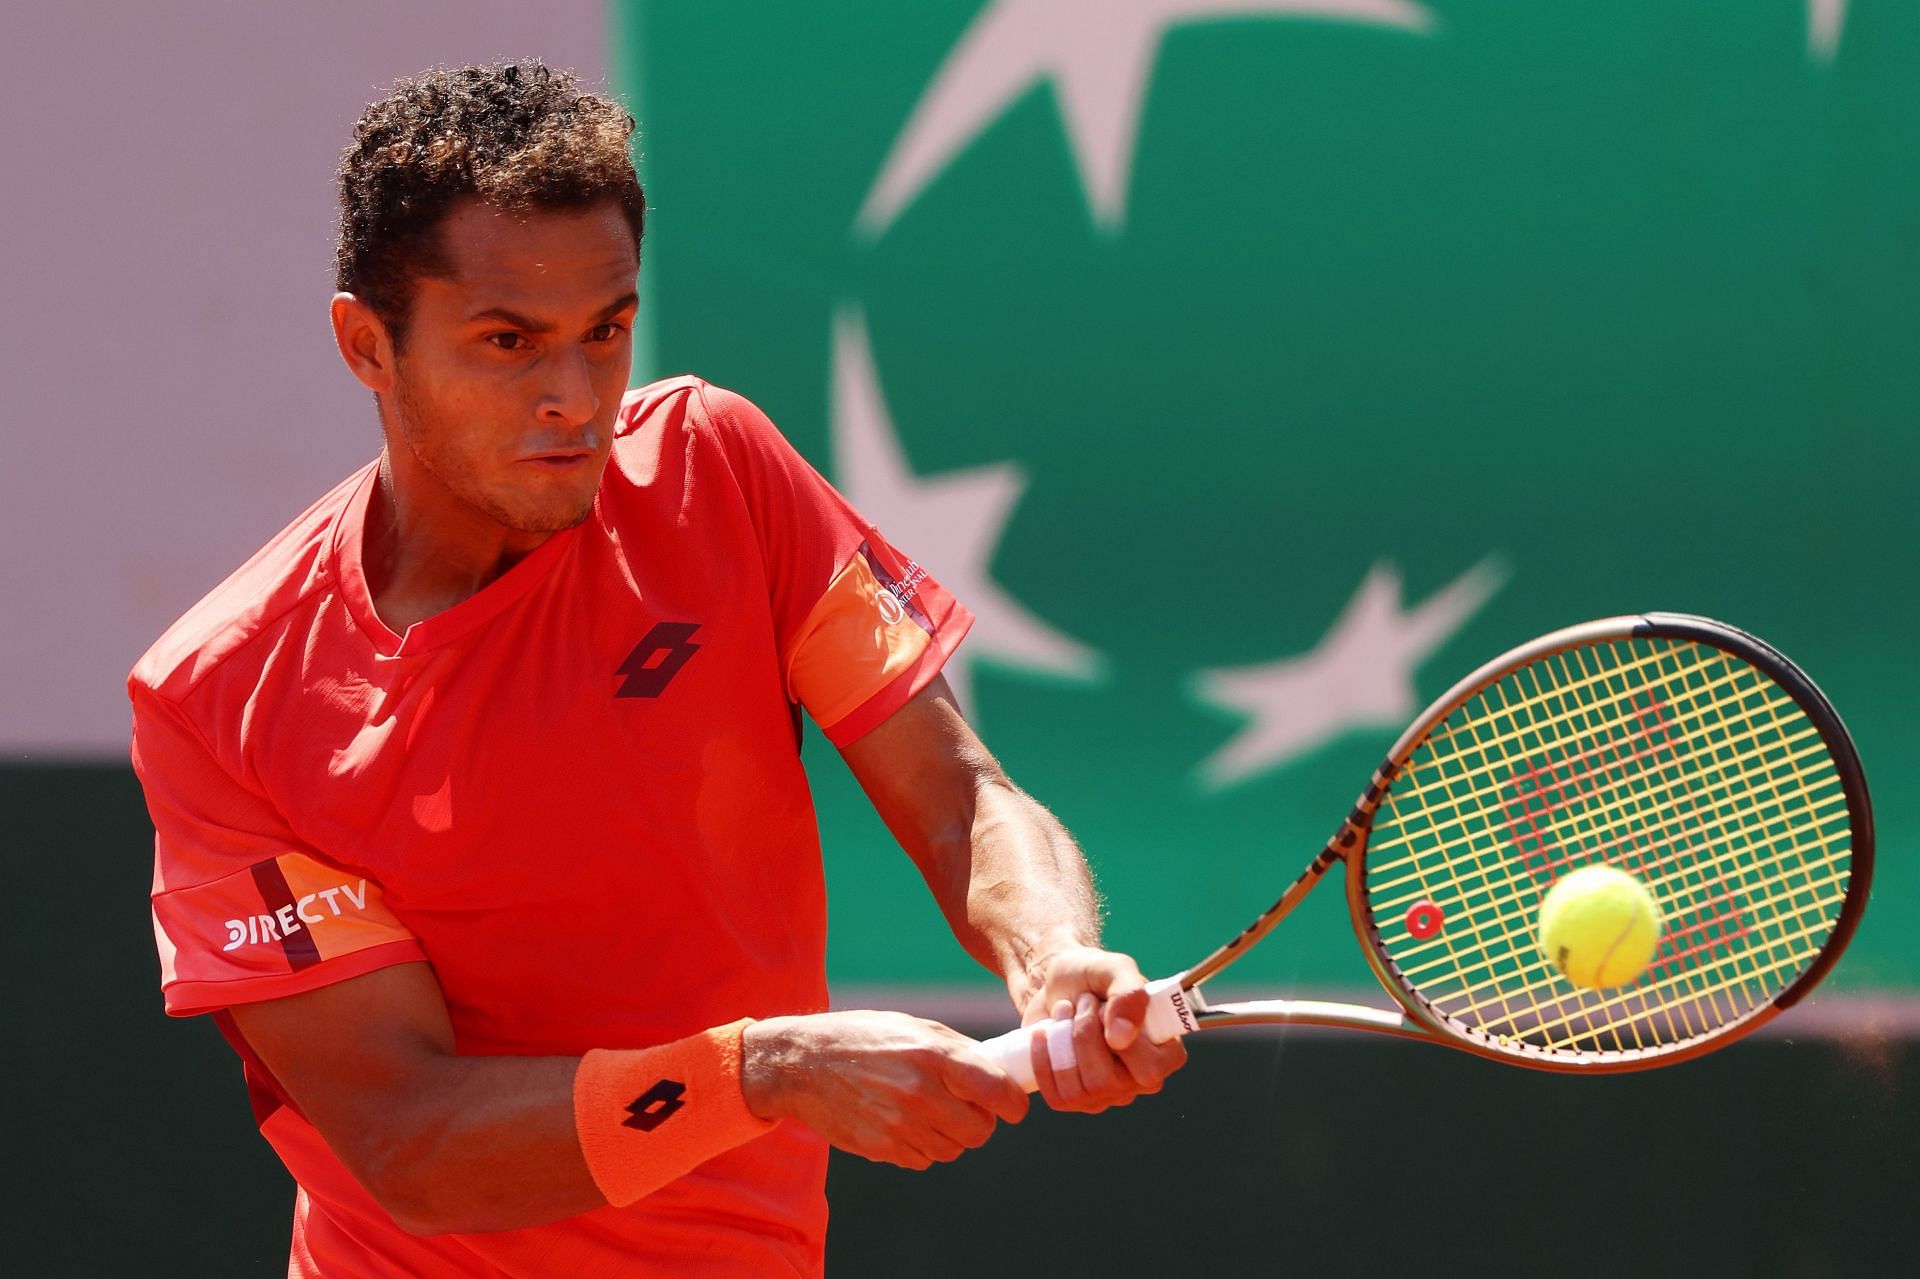 Juan Pablo Varillas in action at the French Open.